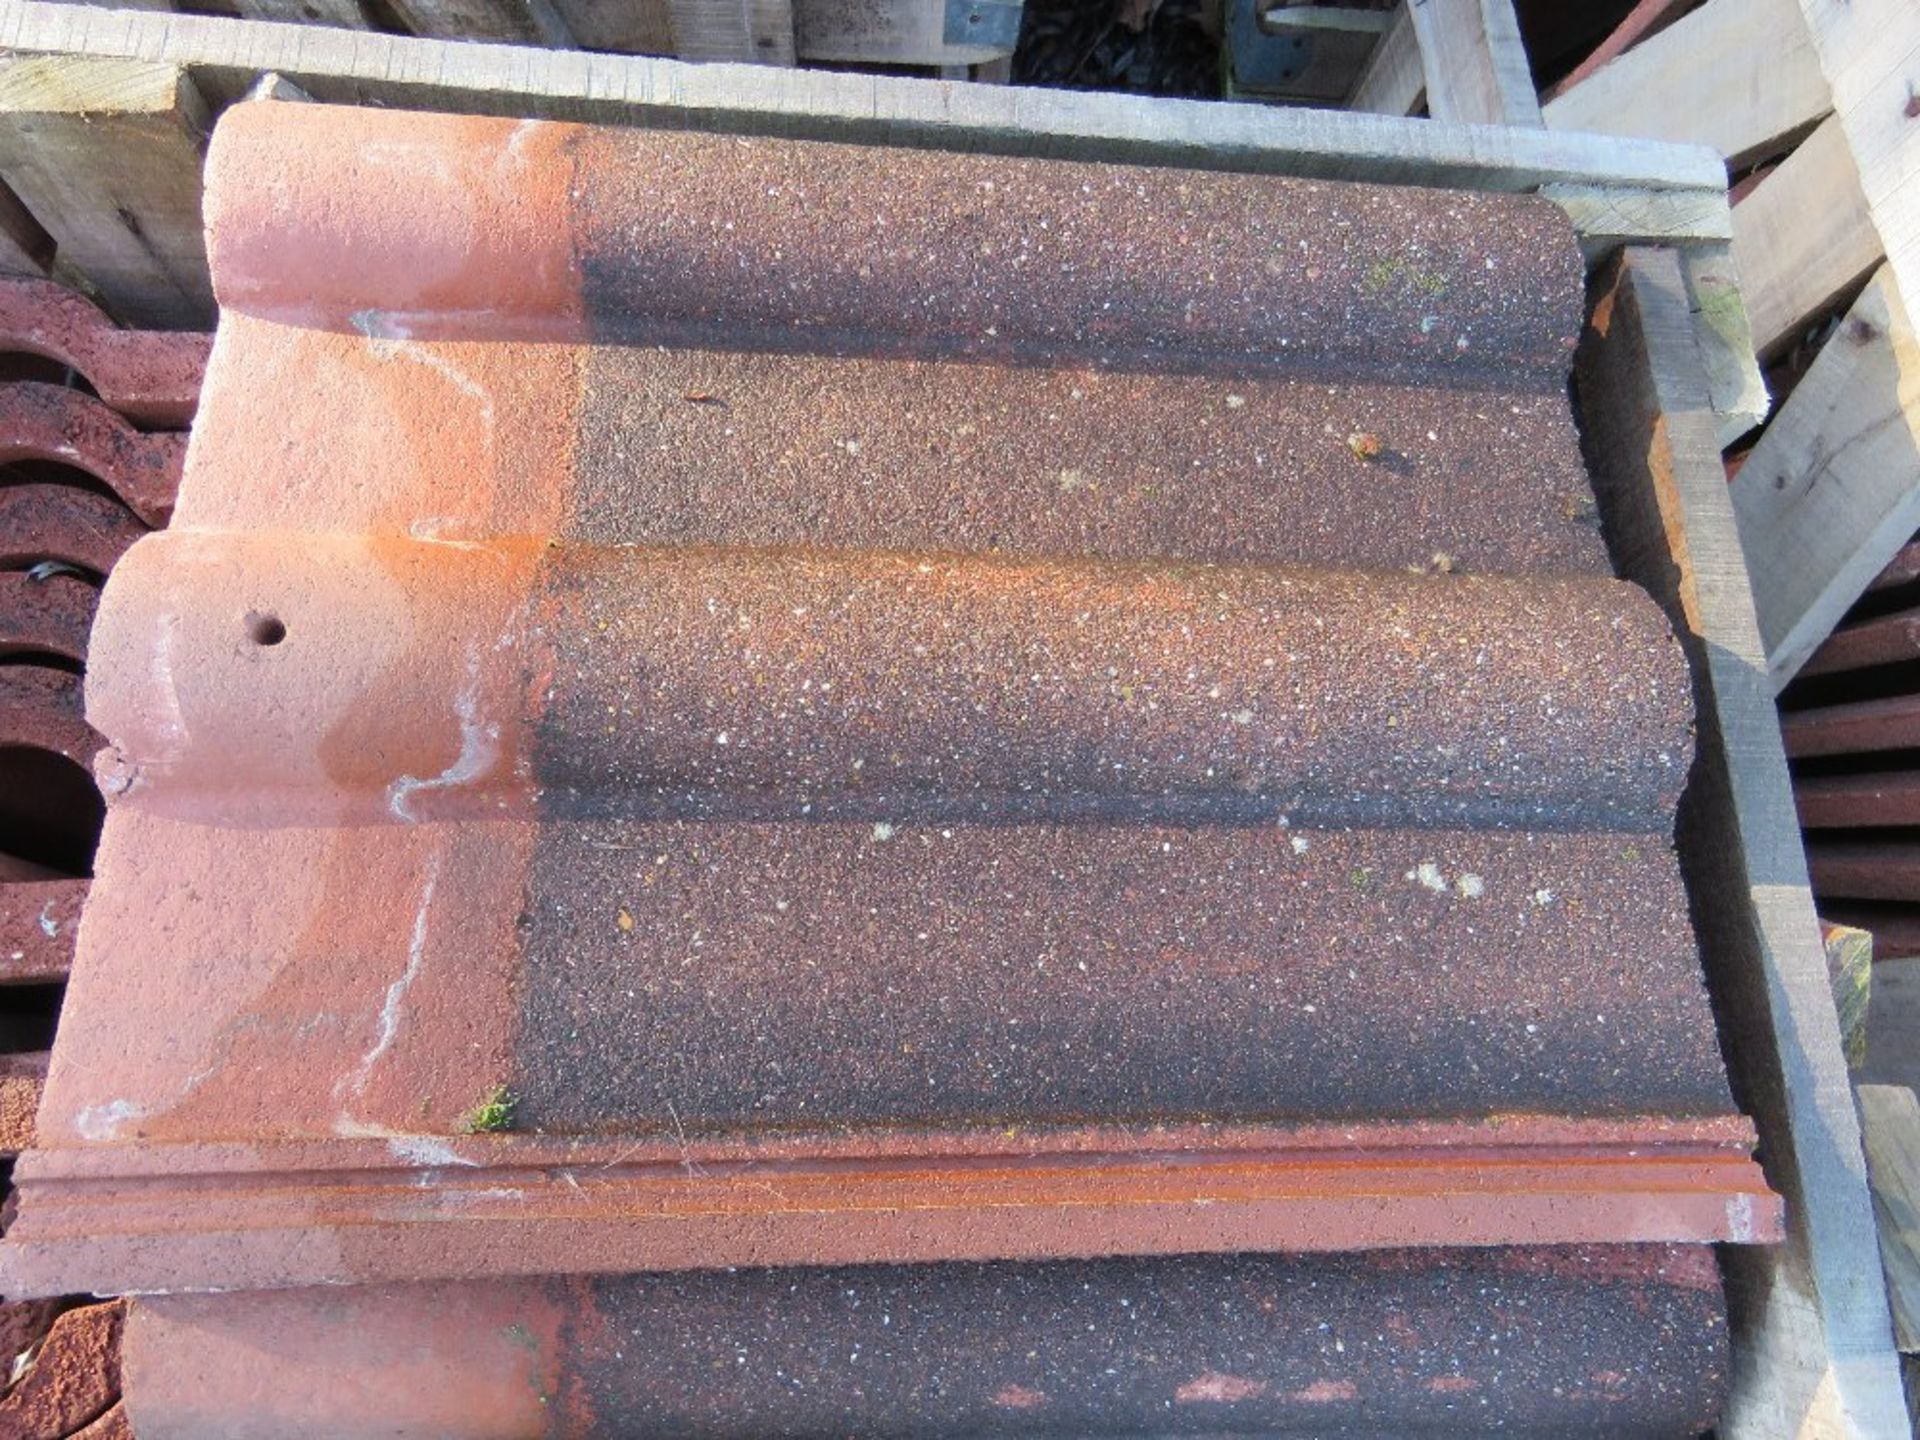 6 X STILLAGES OF REDLAND CONCRETE ROOF TILES, PRE USED. RECENTLY REMOVED FROM HOUSE BEING DEMOLISHED - Image 5 of 5